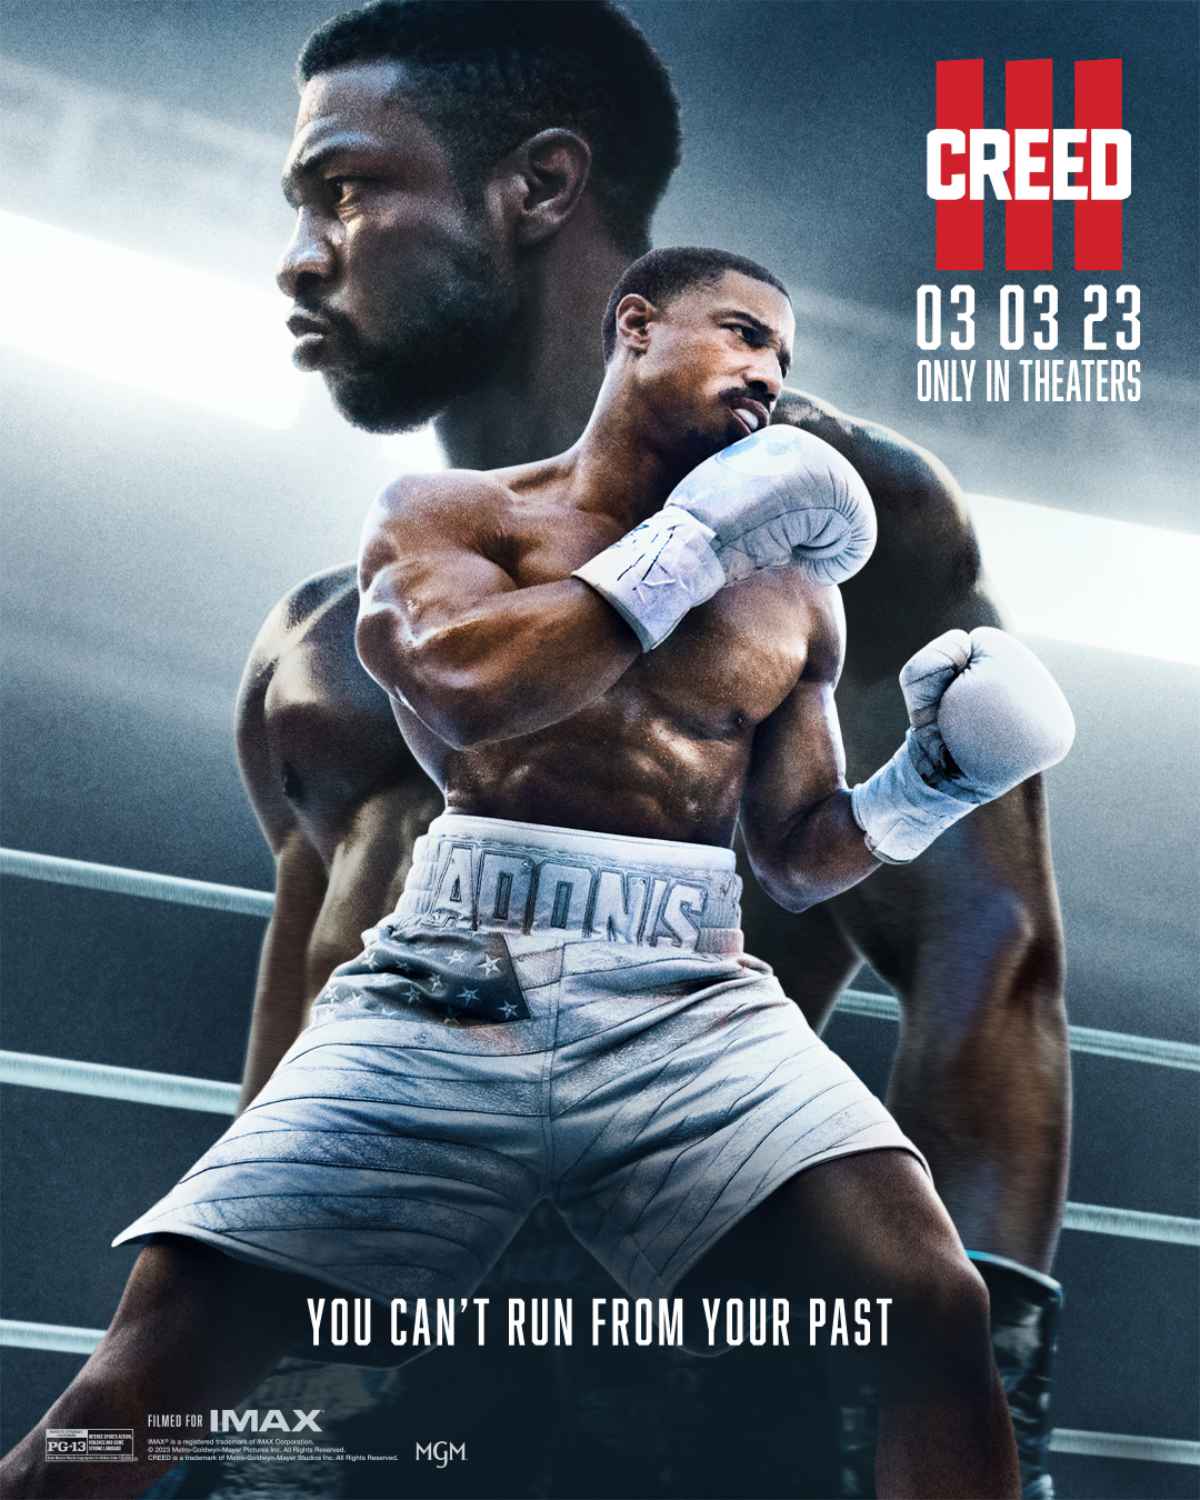 Creed III Trailer and New Posters Debut